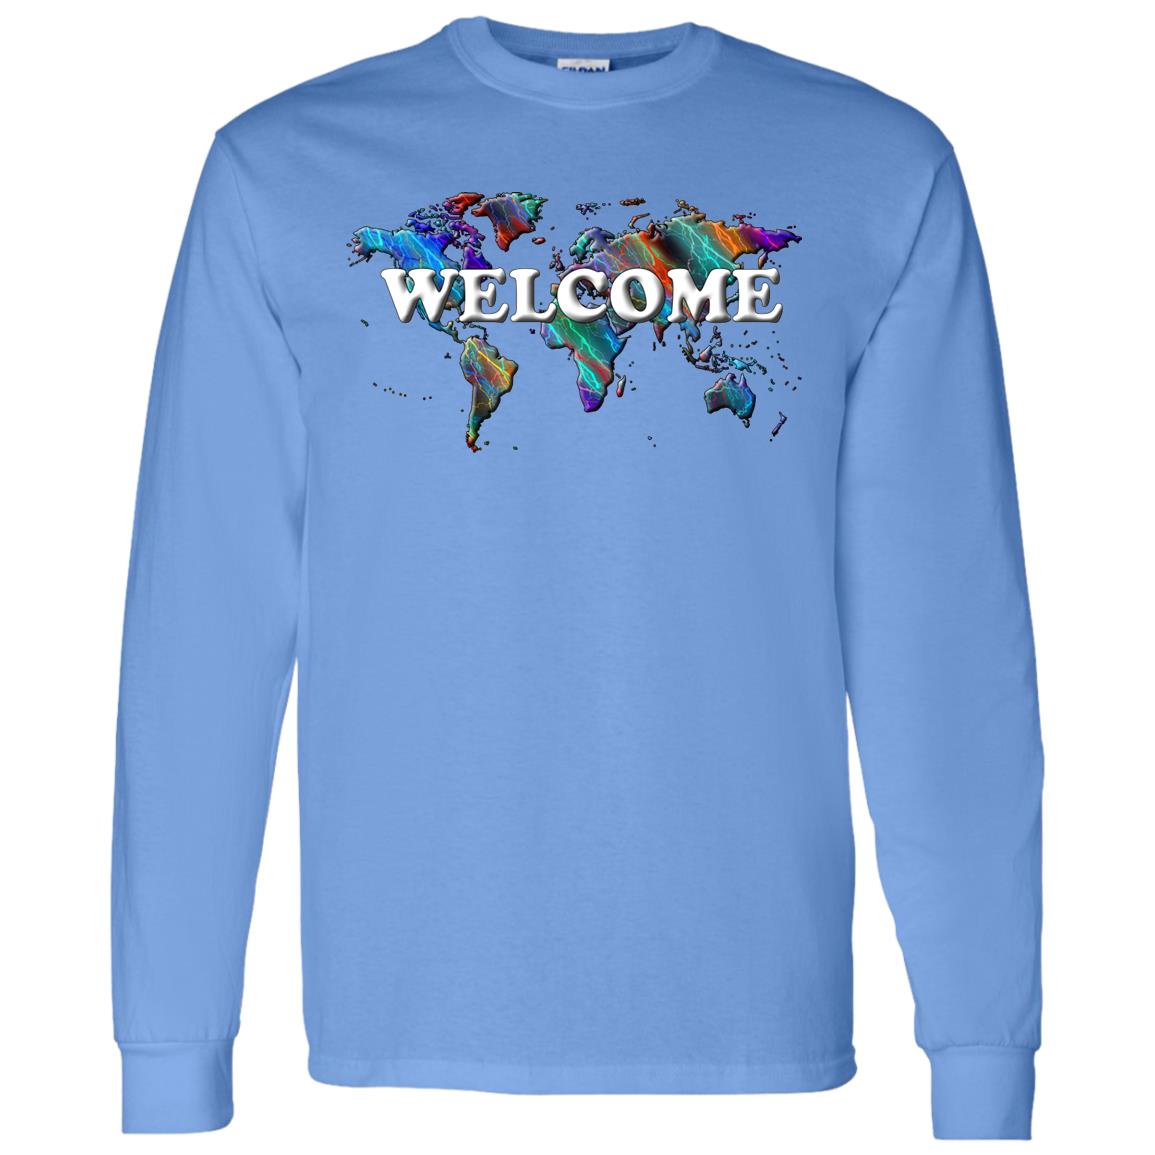 Welcome Long Sleeve Statement T-Shirt